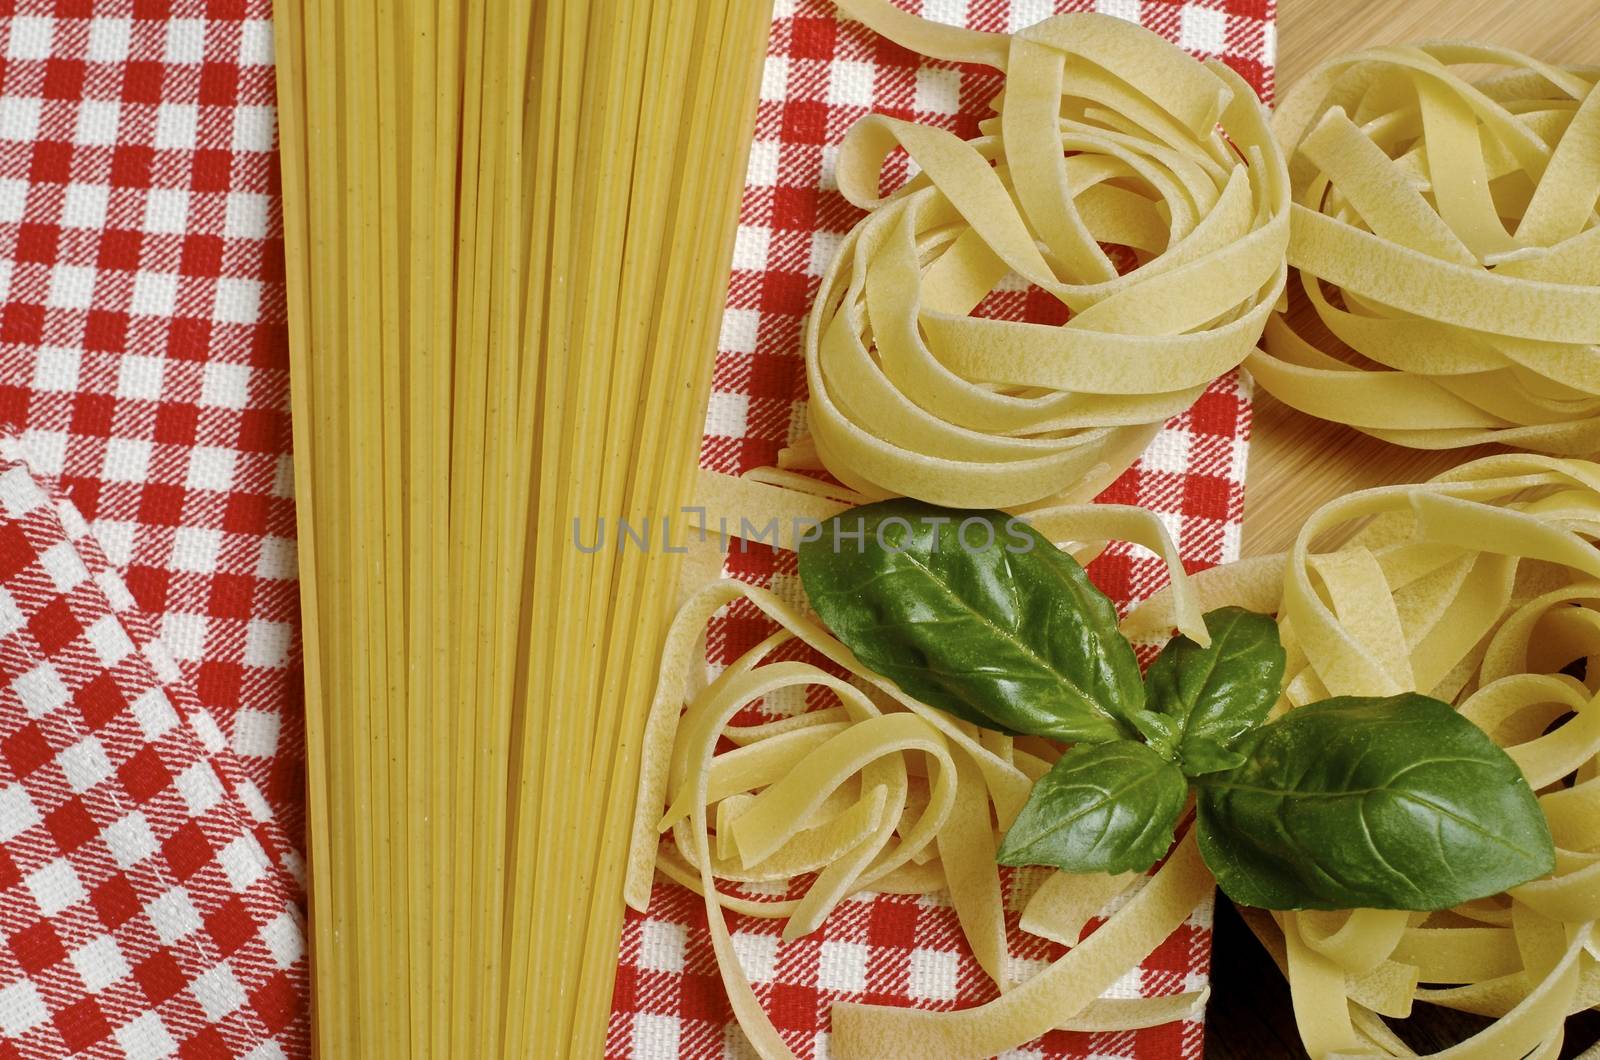 Raw pasta with basil leaf on kitchen towel